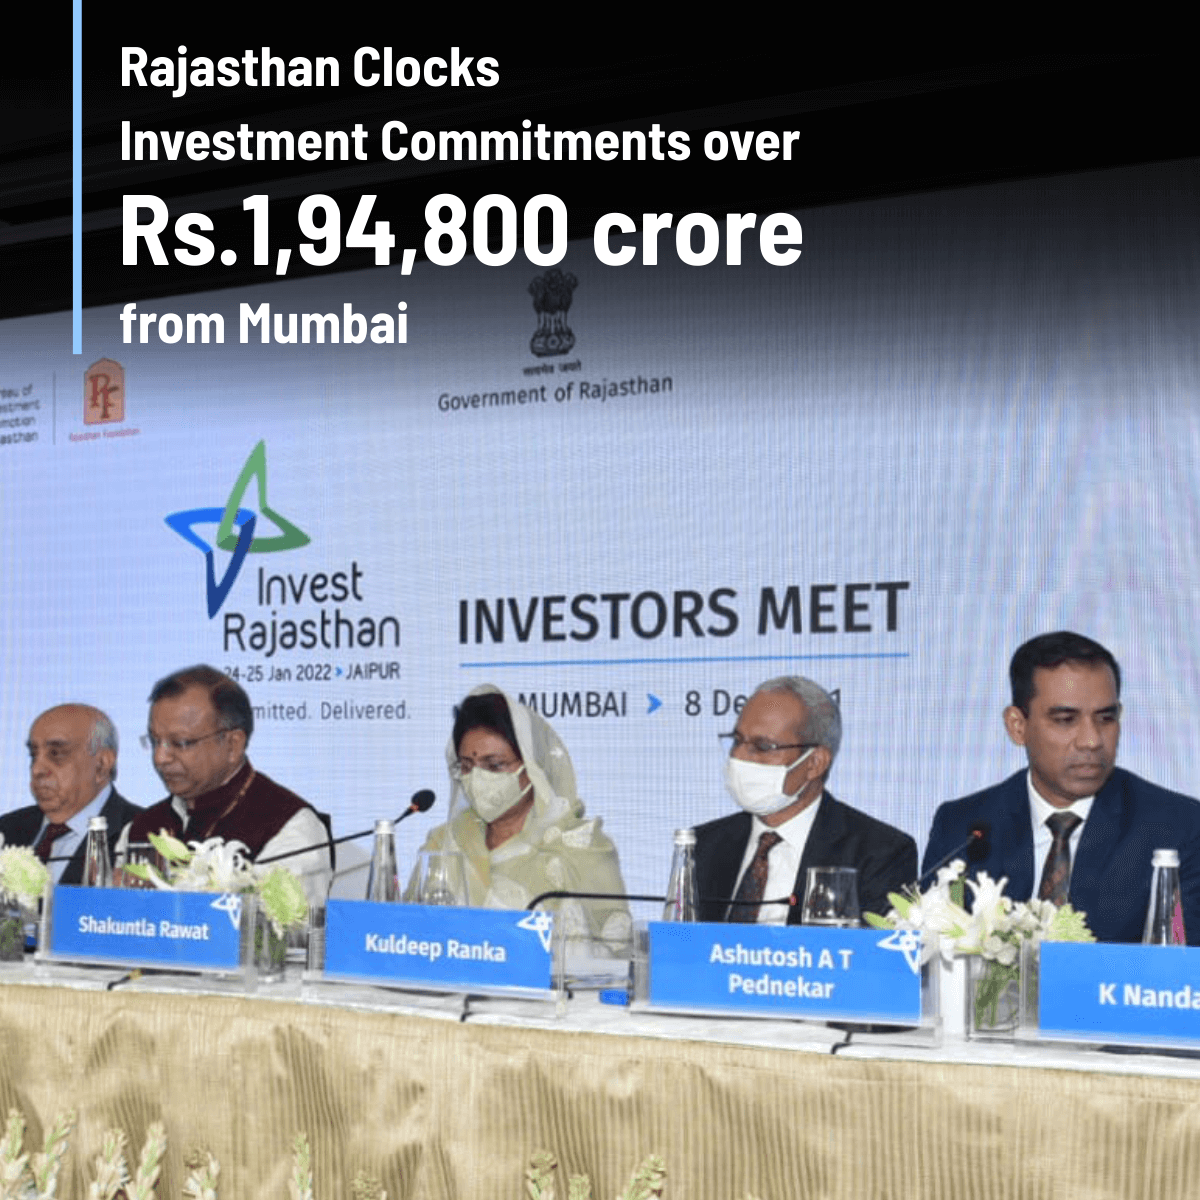 Rajasthan Clocks Investment Commitments over Rs. 1,94,800 Crores from Mumbai